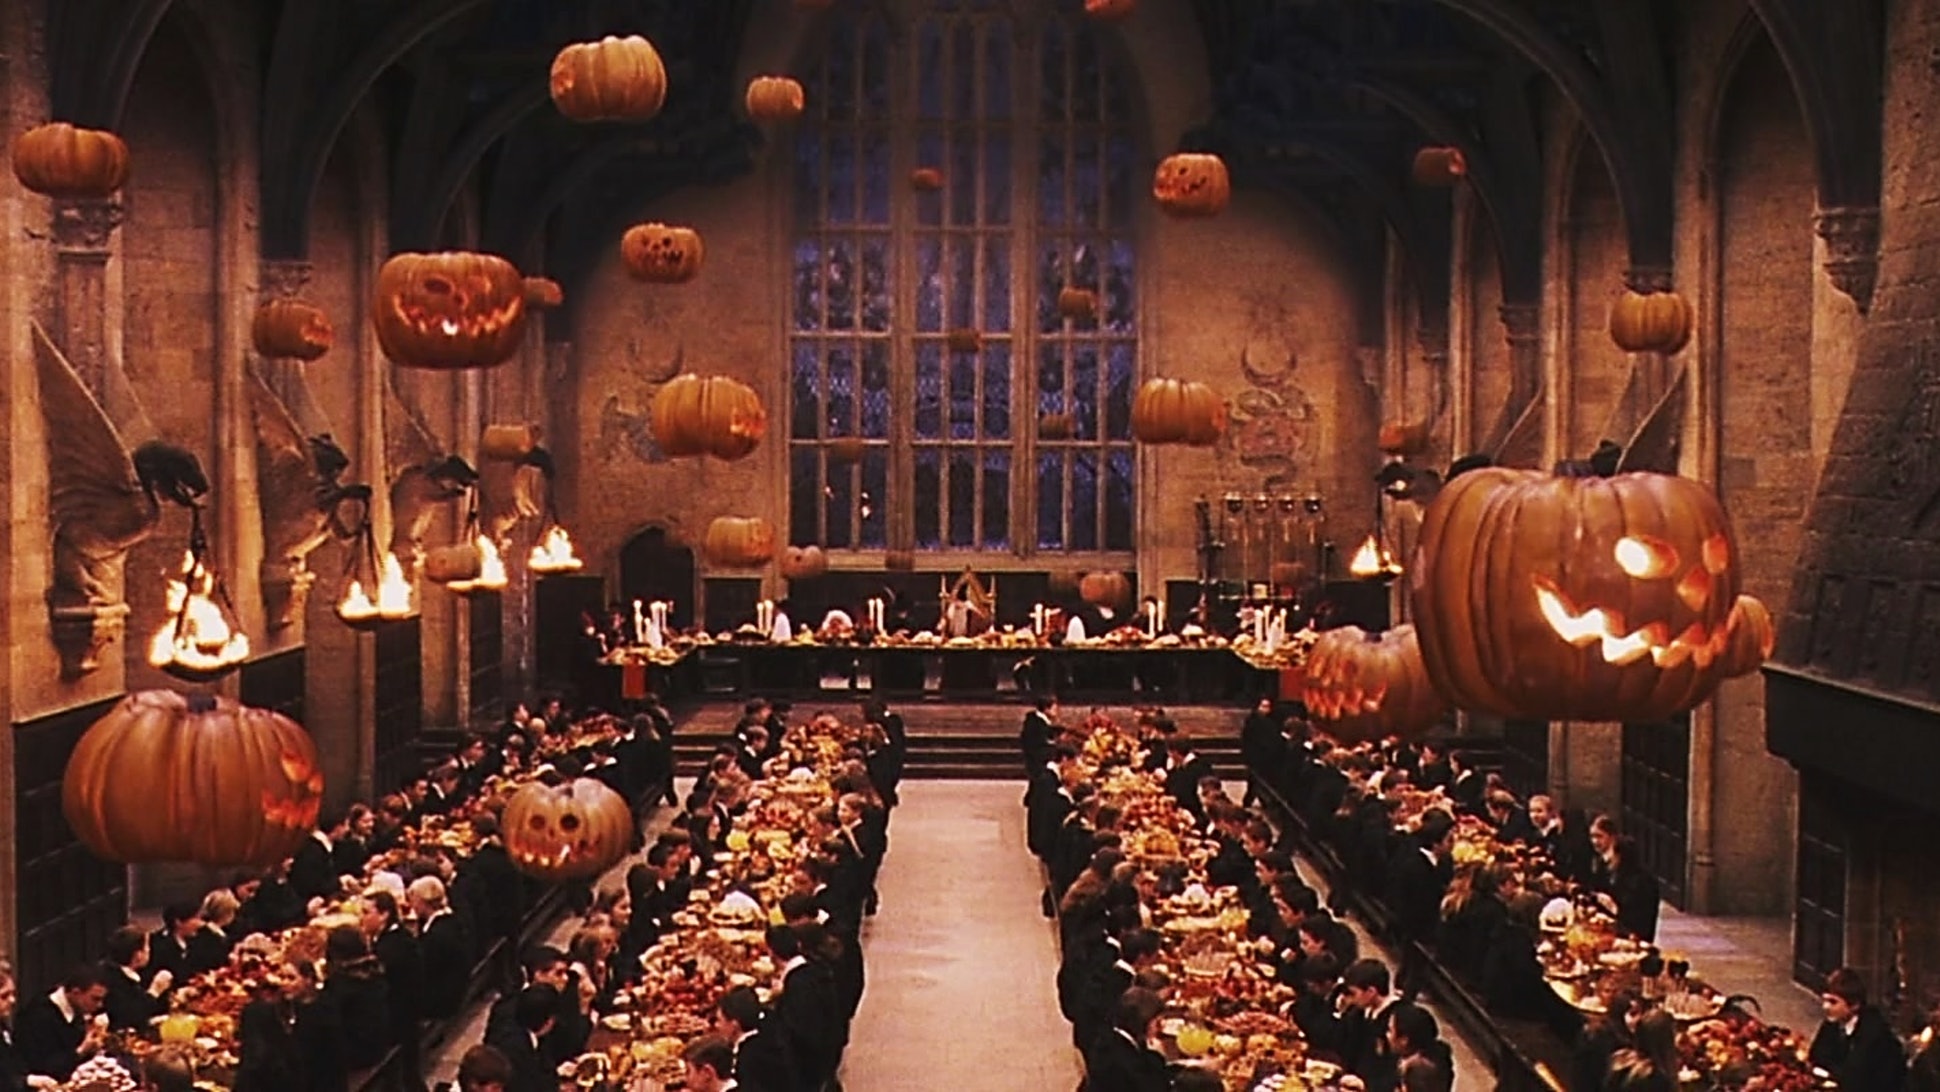 It's Halloween! Time for some Potter-crafting!